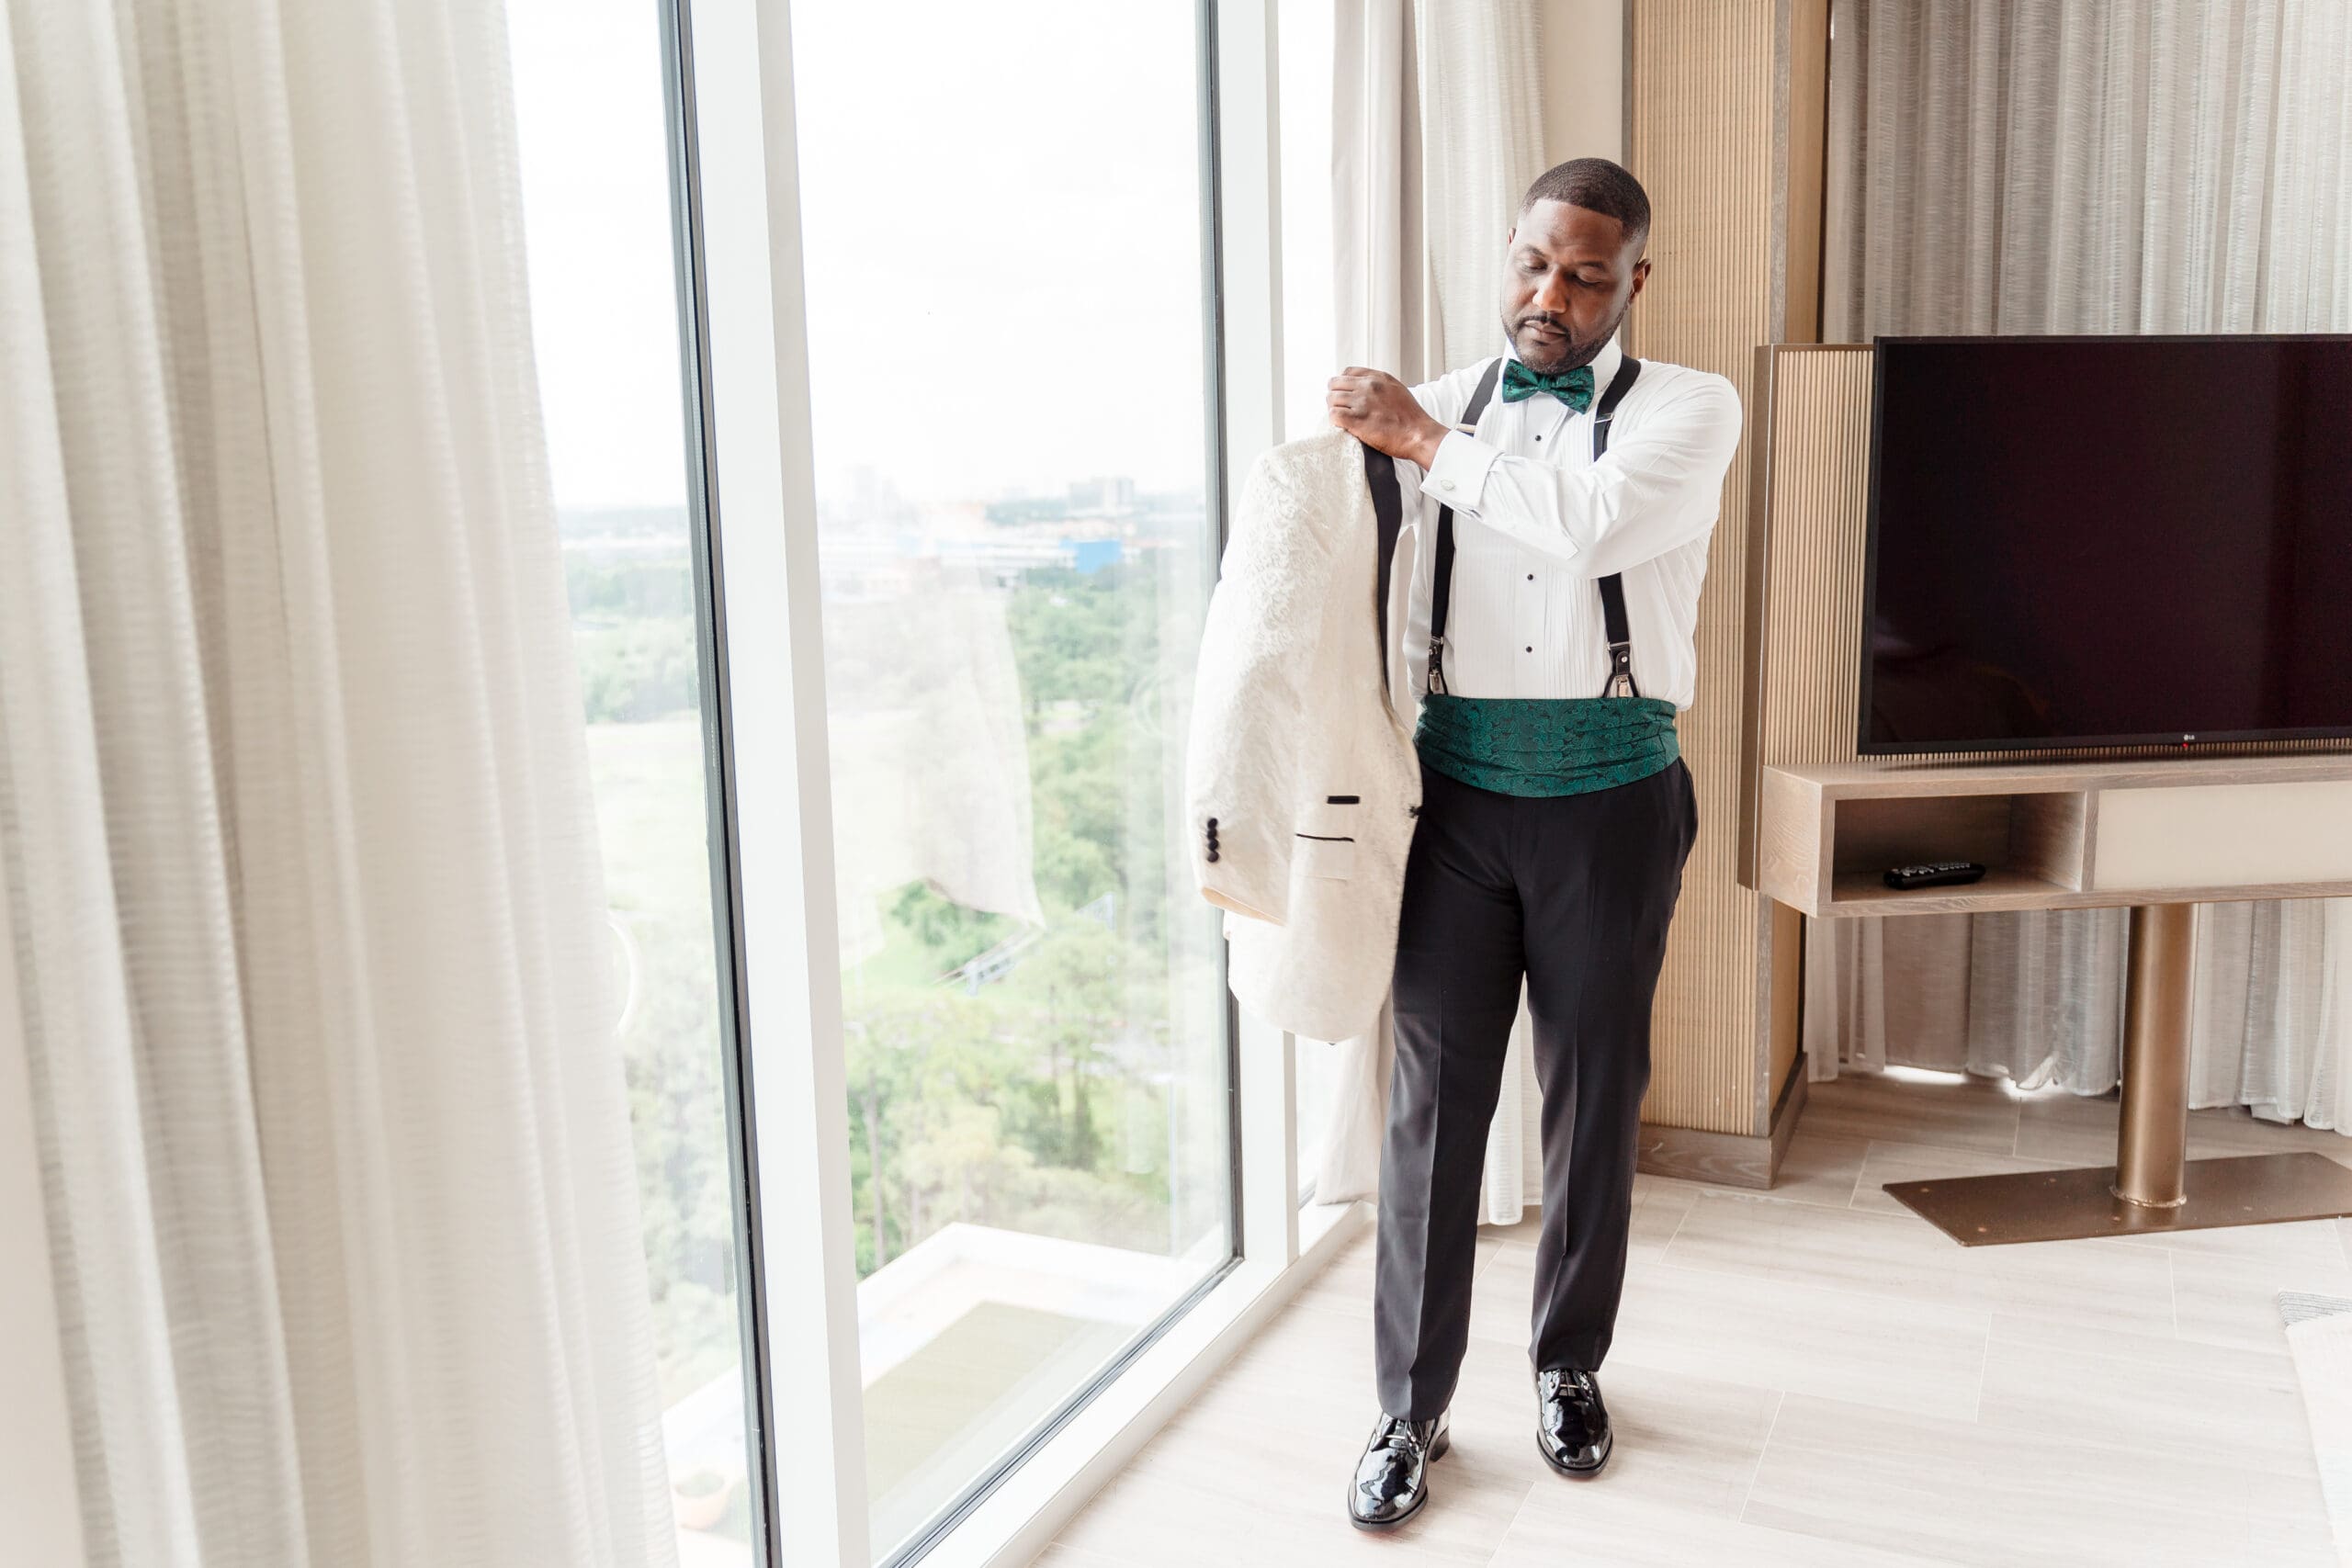 Glen stands by the window, donning his sports coat, in a hotel room with a picturesque view.